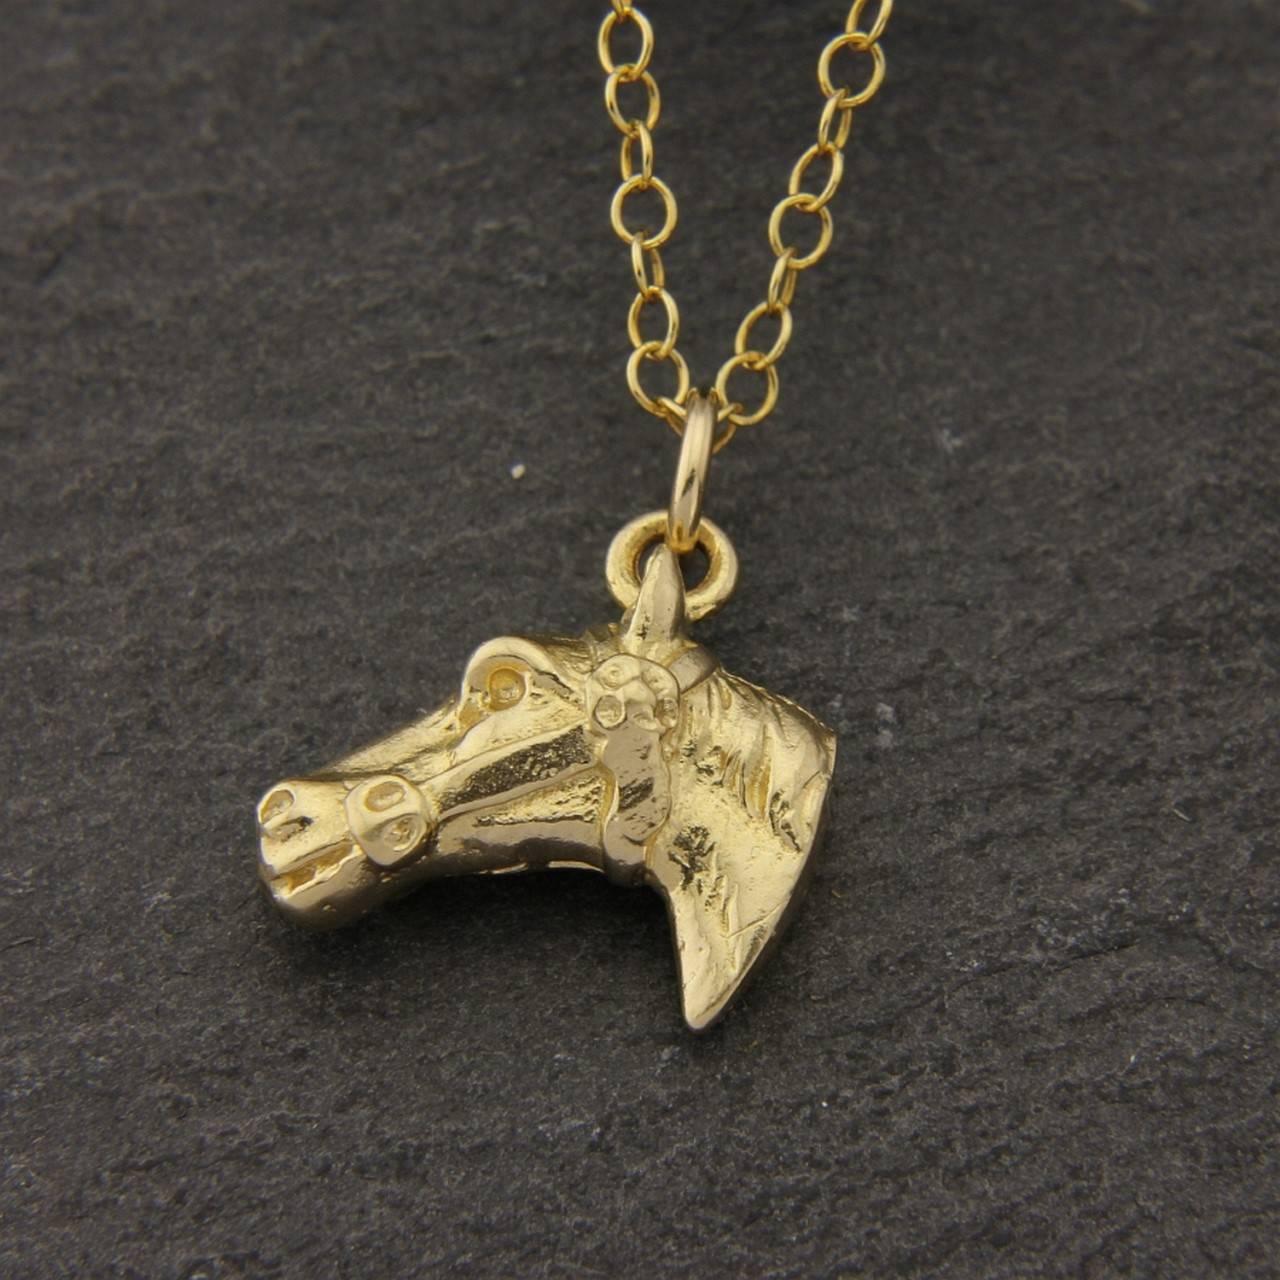 An artistic representation of the Horse head as a pendant, made from solid 9 Carat Gold with its 18 inches chain included.
This beautifully detailed, realistic design is handmade in Surrey by Simon Kemp, who is a third generation British jeweller.